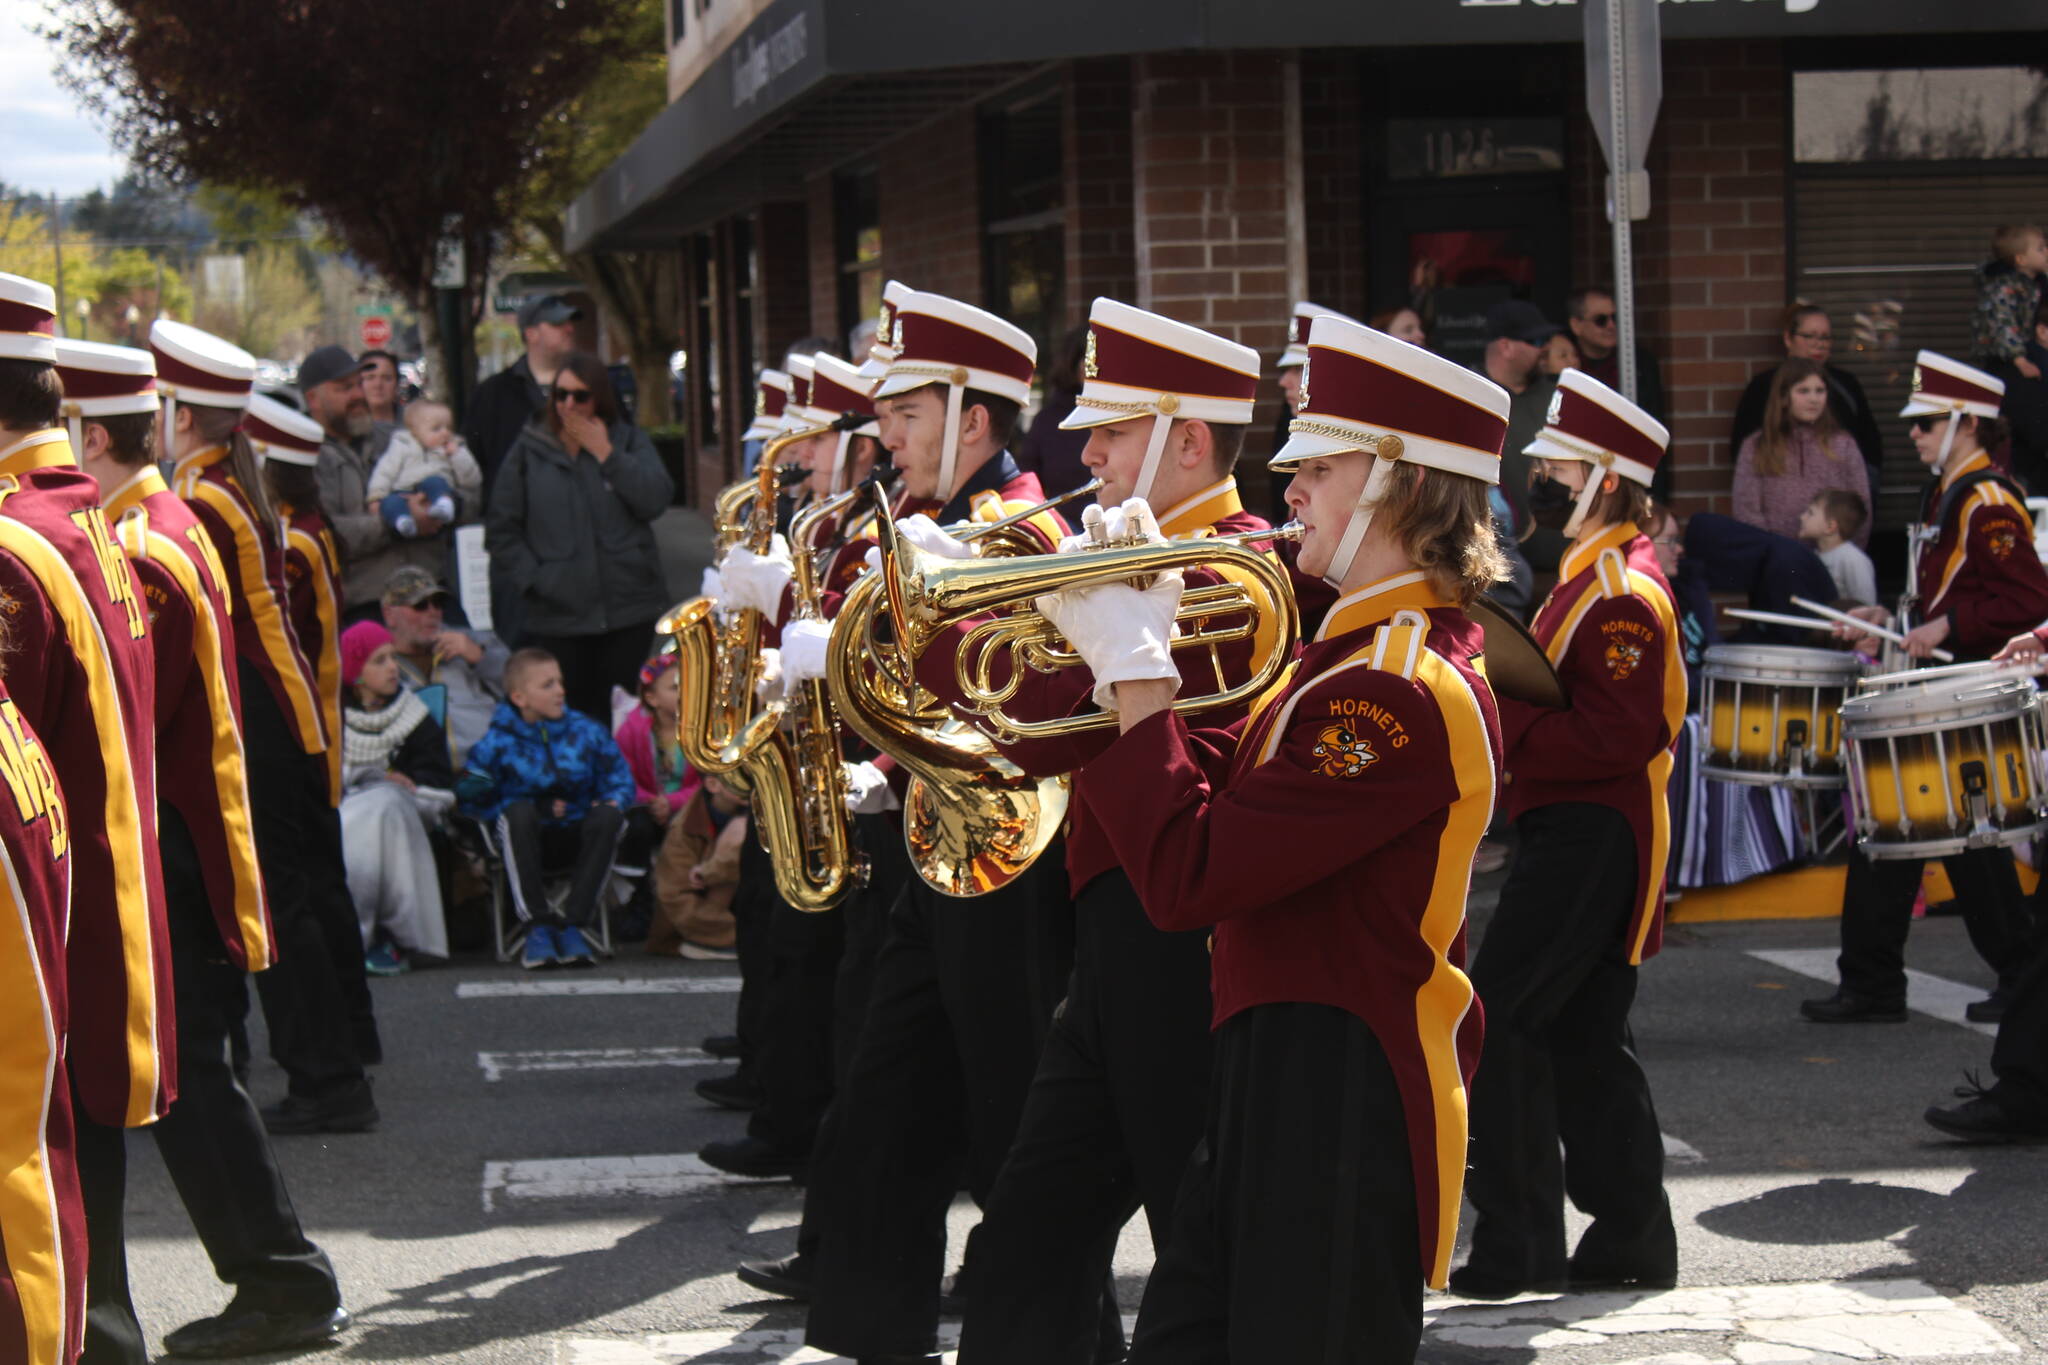 The White River Hornets perform during the Parade’s stretch through Sumner. Photo by Ray-Miller Still